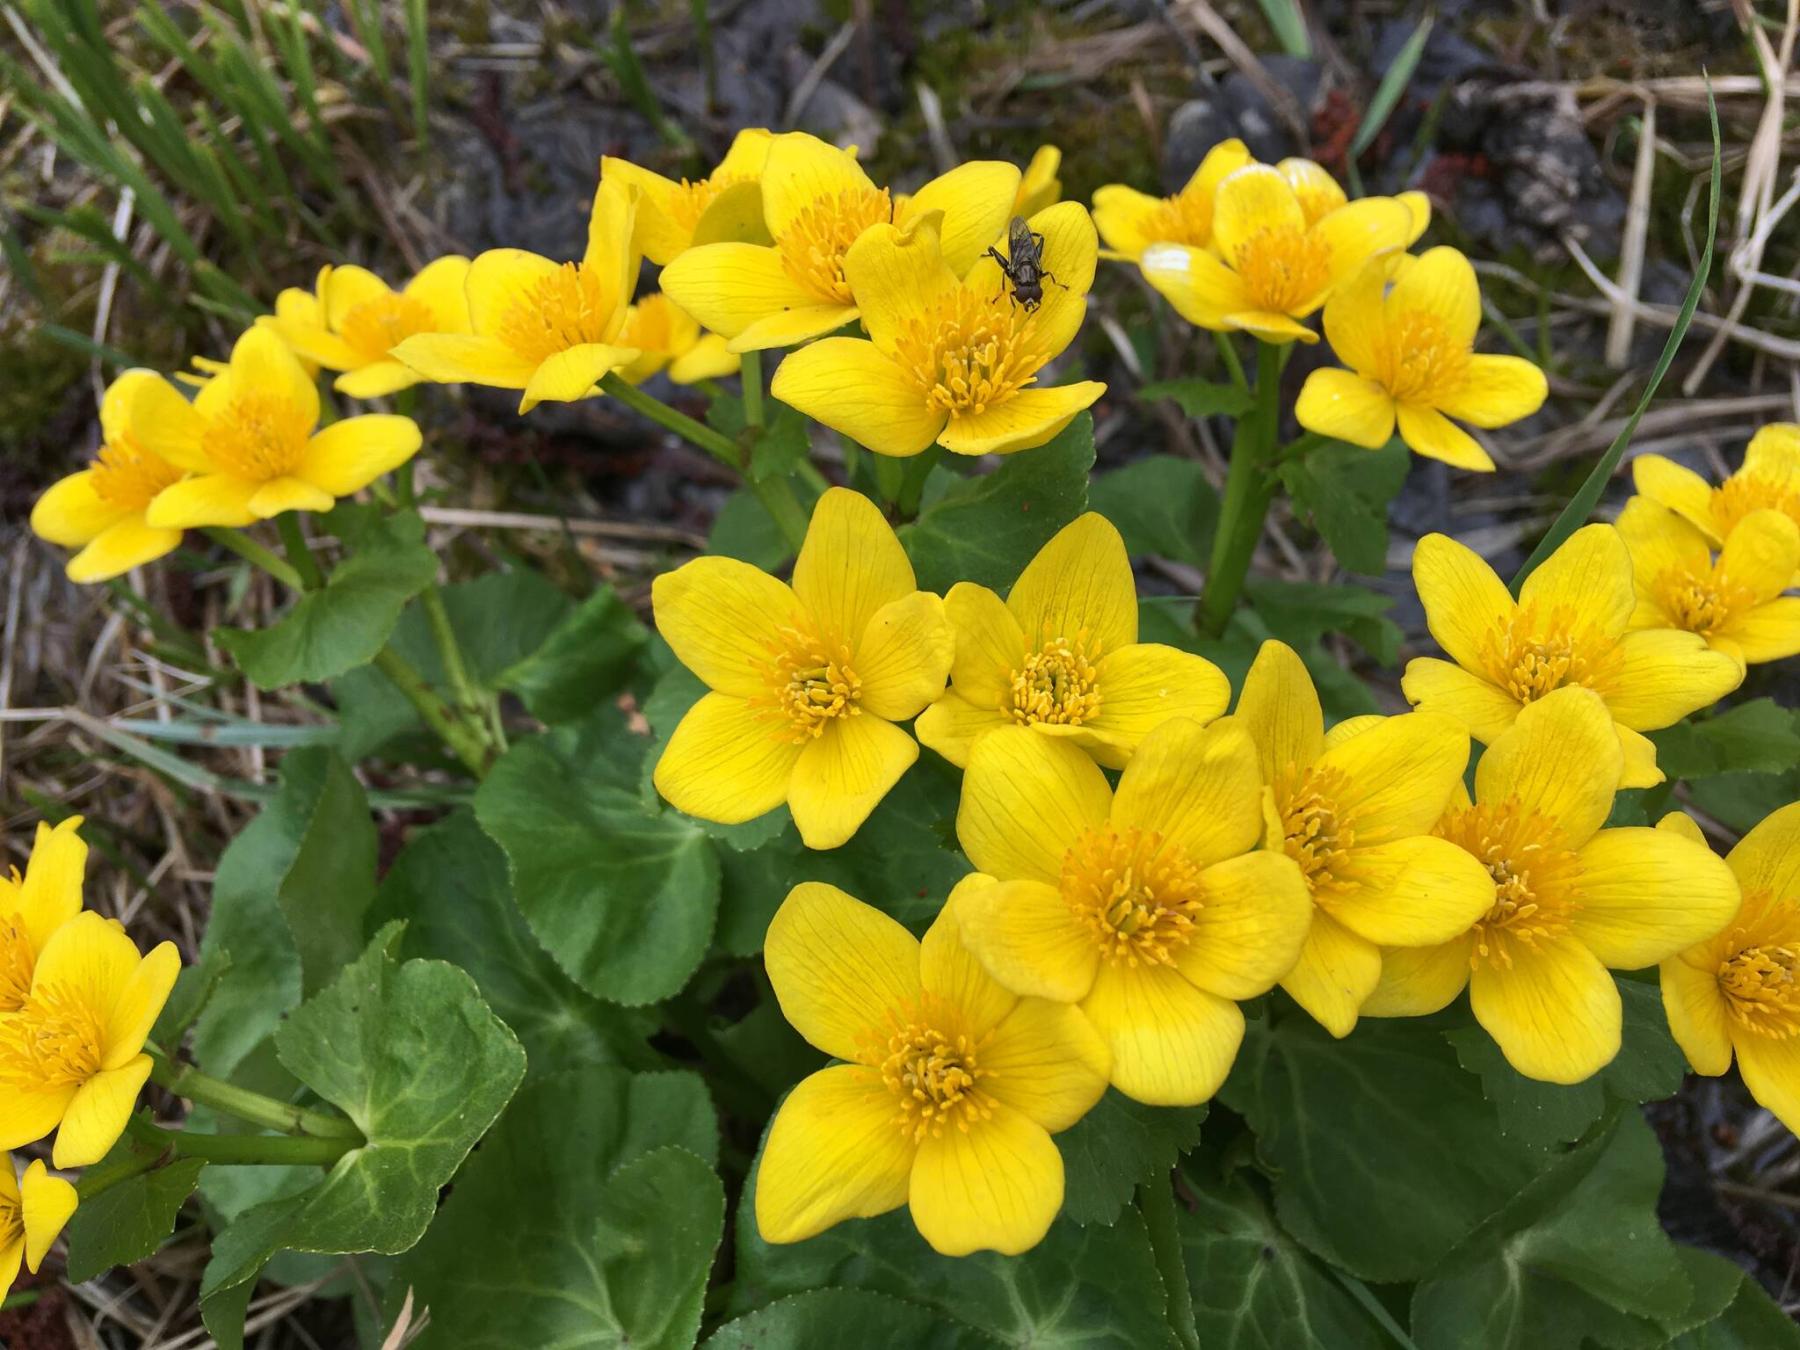  <p>Lyndon Penner</p>
                                <p>Marsh Marigold is a native species that usually blooms by the second week of May.</p> 